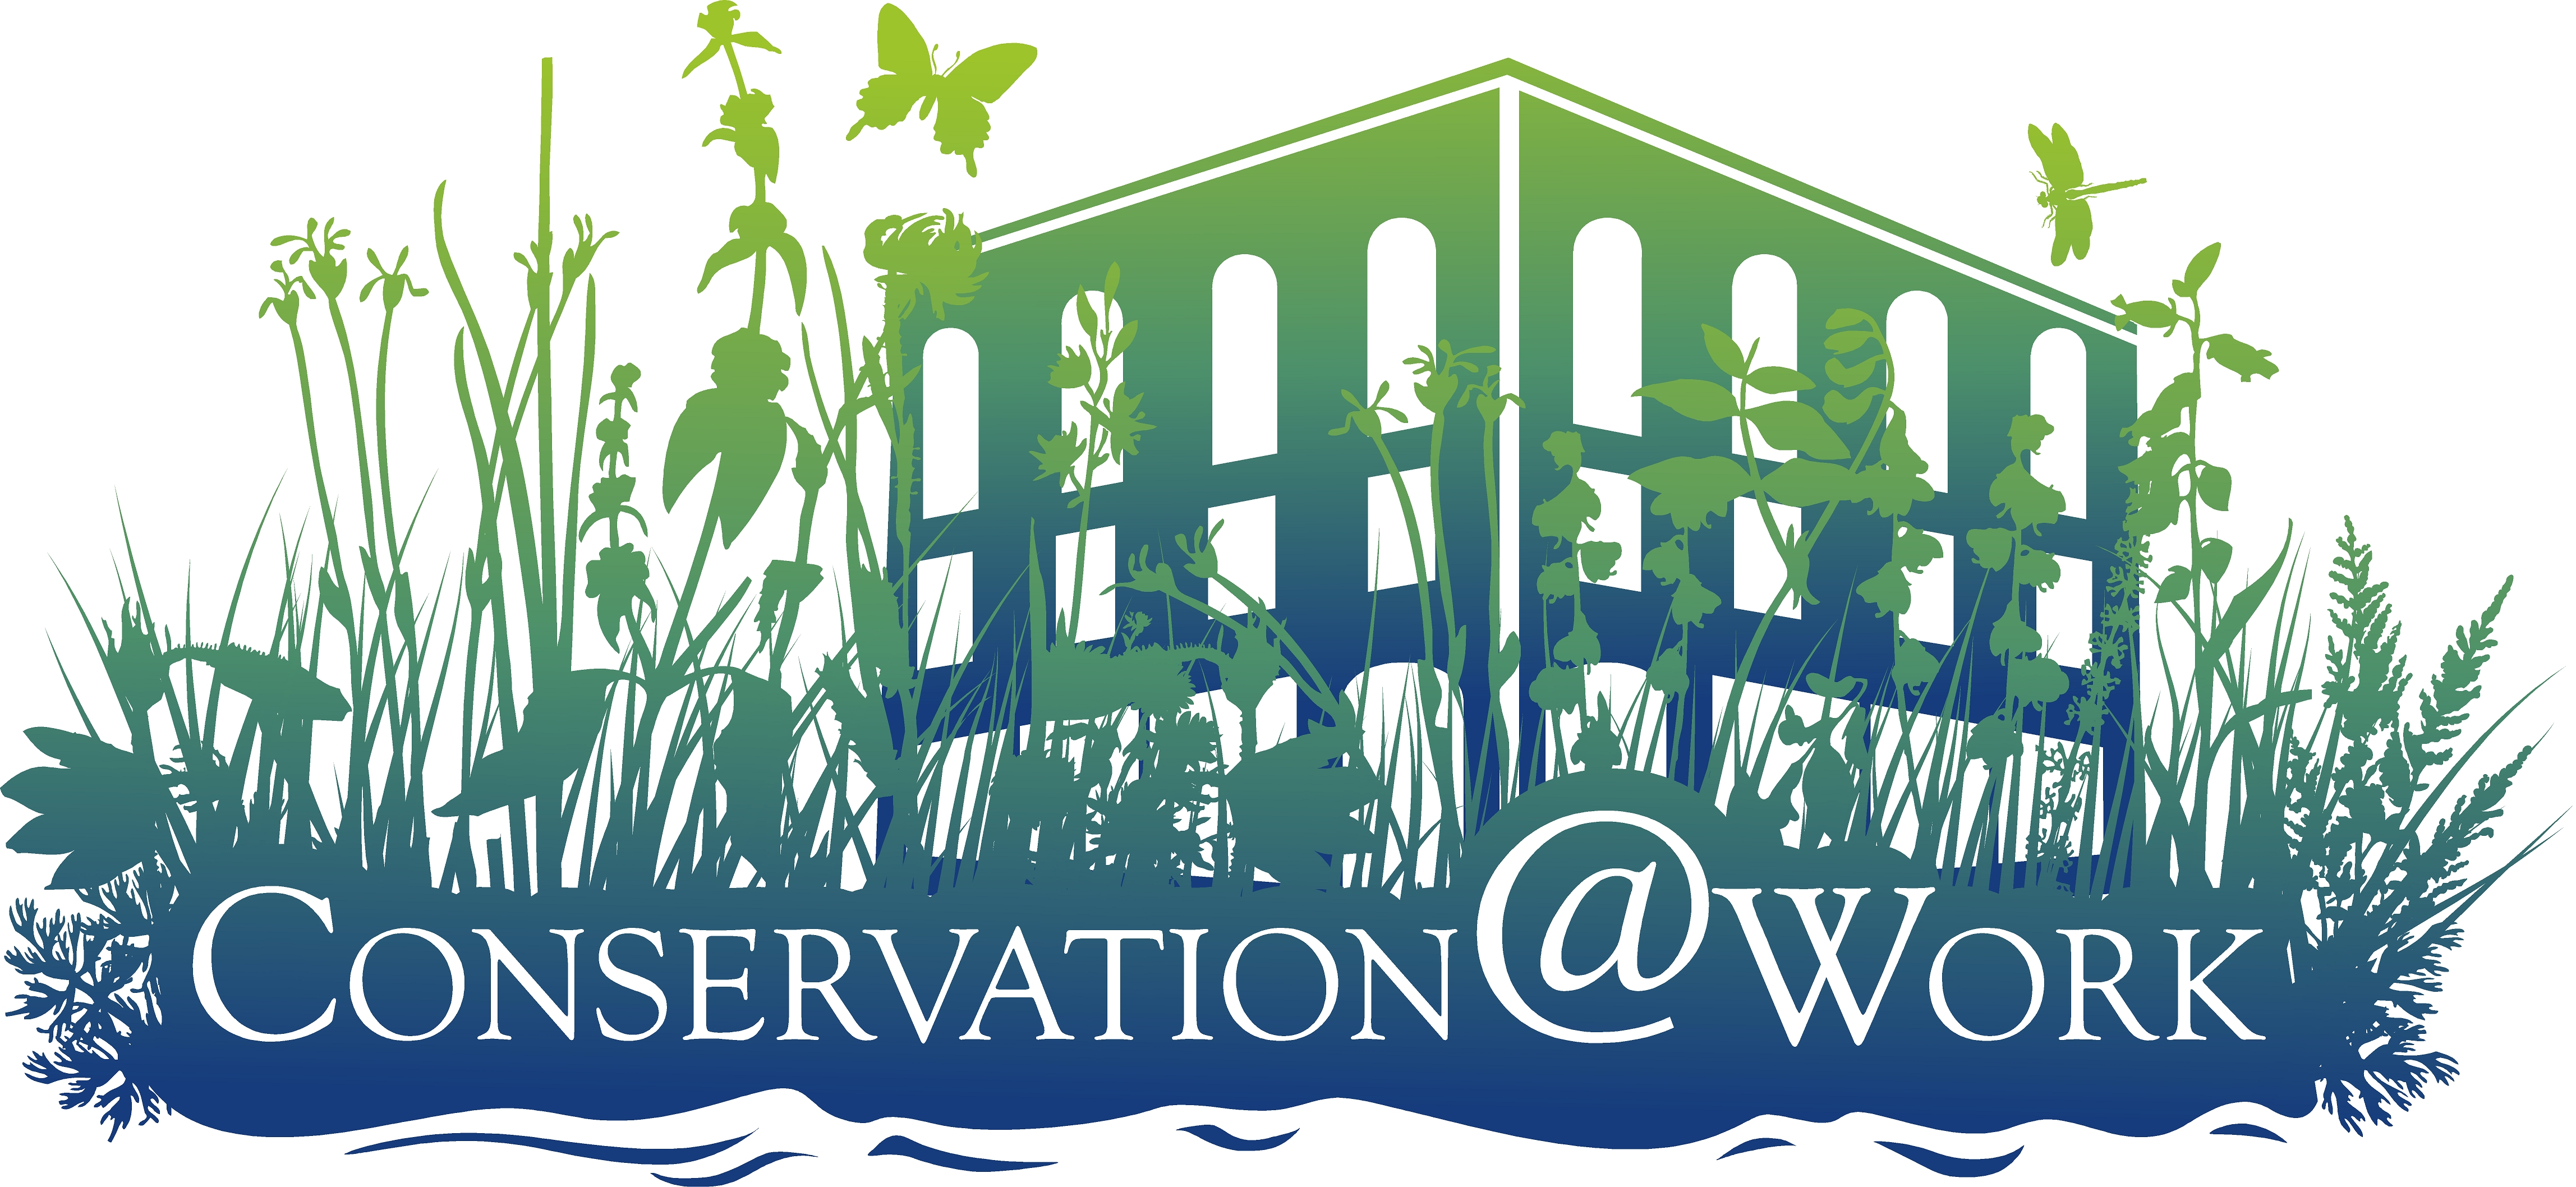 Conservation@Work Membership: Business with 11 or more employees